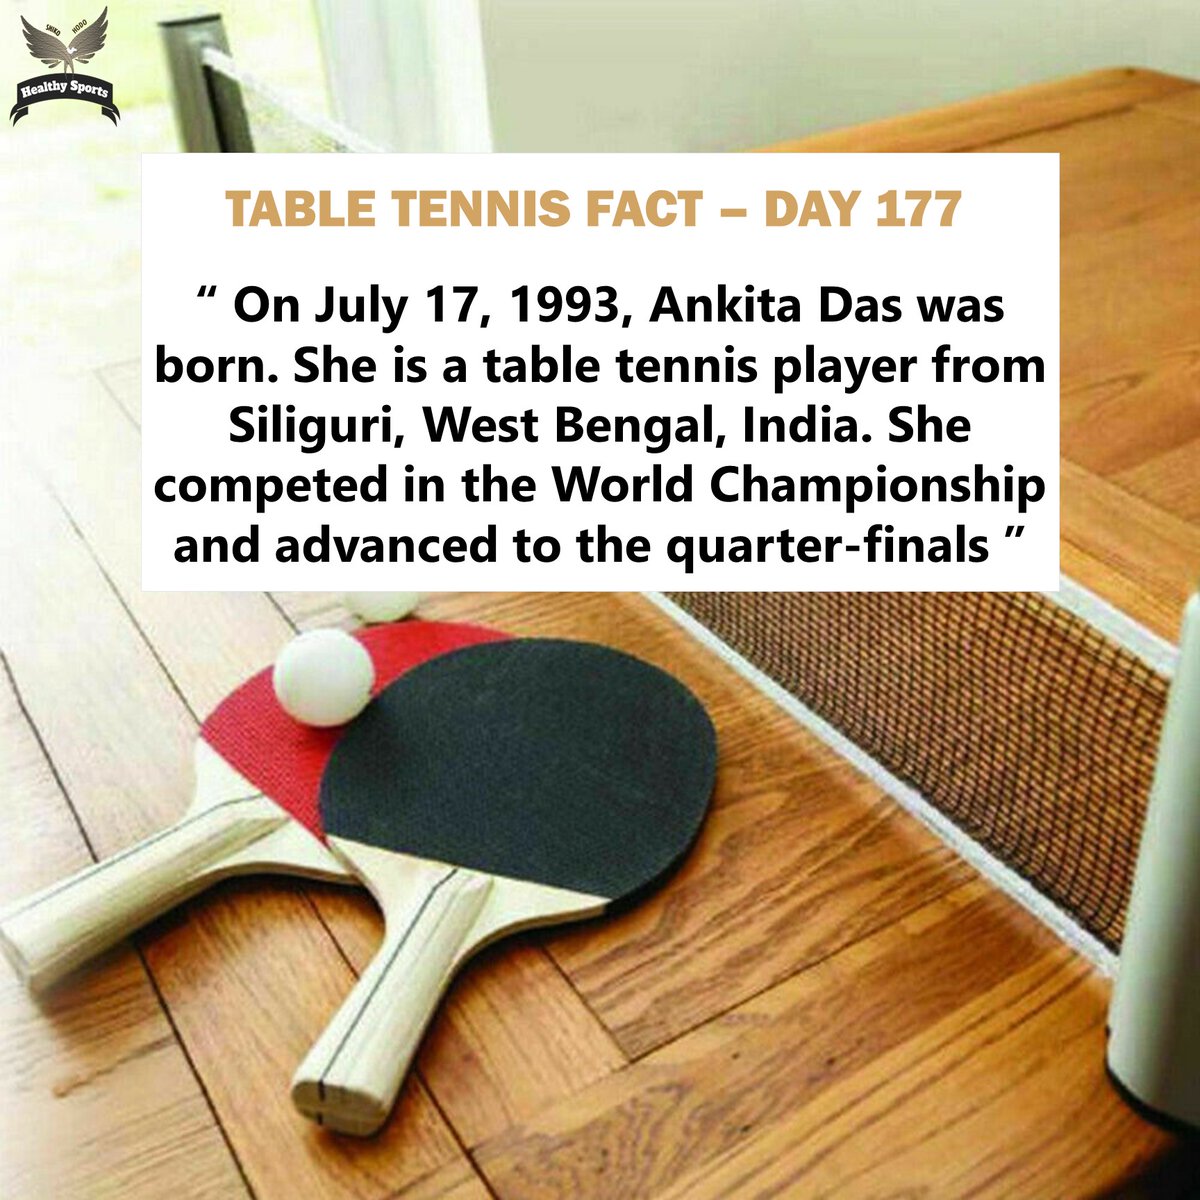 Table Tennis Fact - Day 177

#tabletennis #pingpong #TTfacts #tabletennisdaily #sport #ittf #tabletennistraining #tabletenniscoach #pingpongtable #tabletennisteam #Gozzimma #TTdaily #KnowmorefactsaboutTT #ankitadas #ankitadastt #ttplayerankitadas #ankitadasolympian